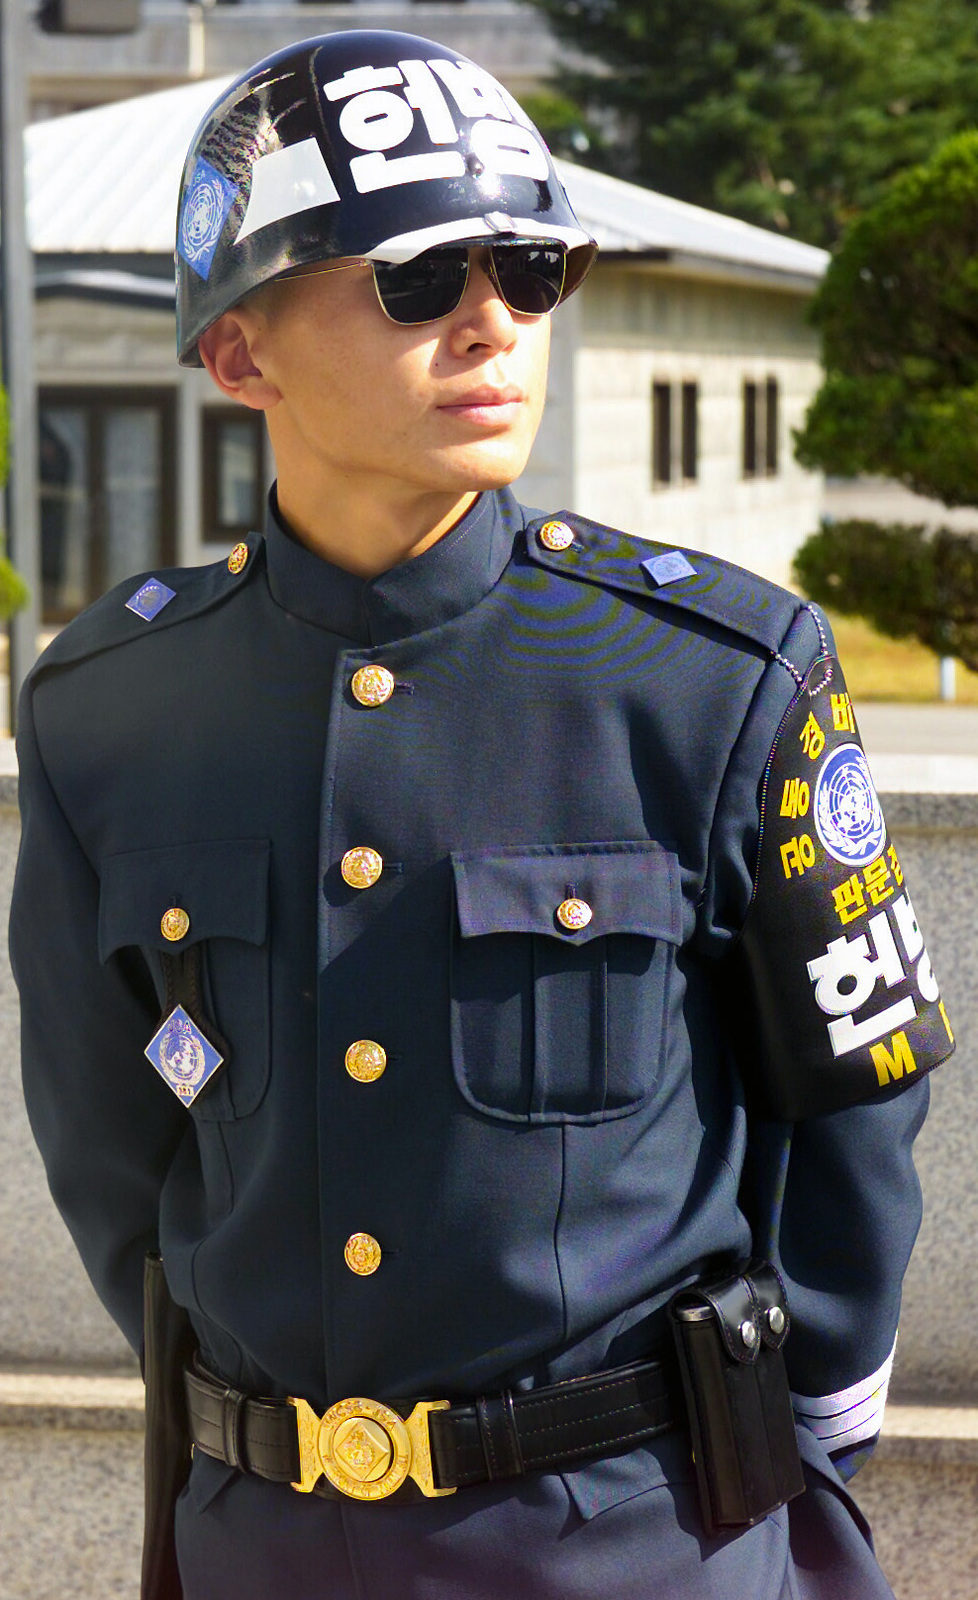 a-republic-of-korea-rok-military-police-mp-stands-guard-duty-at-the-korean-a1a030-1600.jpg